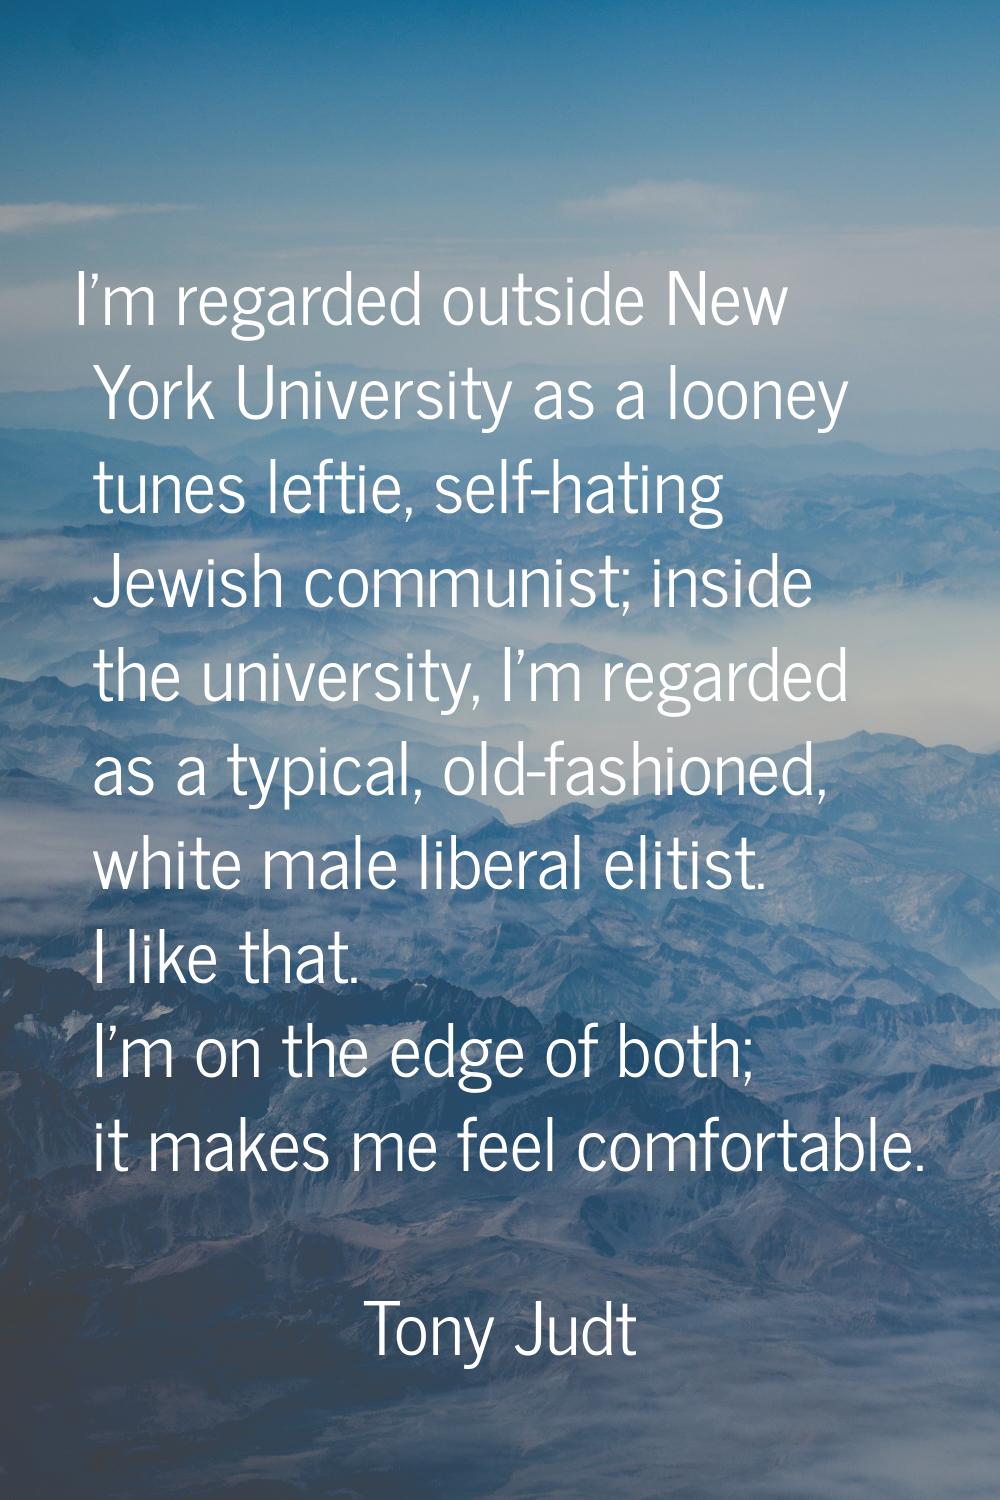 I'm regarded outside New York University as a looney tunes leftie, self-hating Jewish communist; in